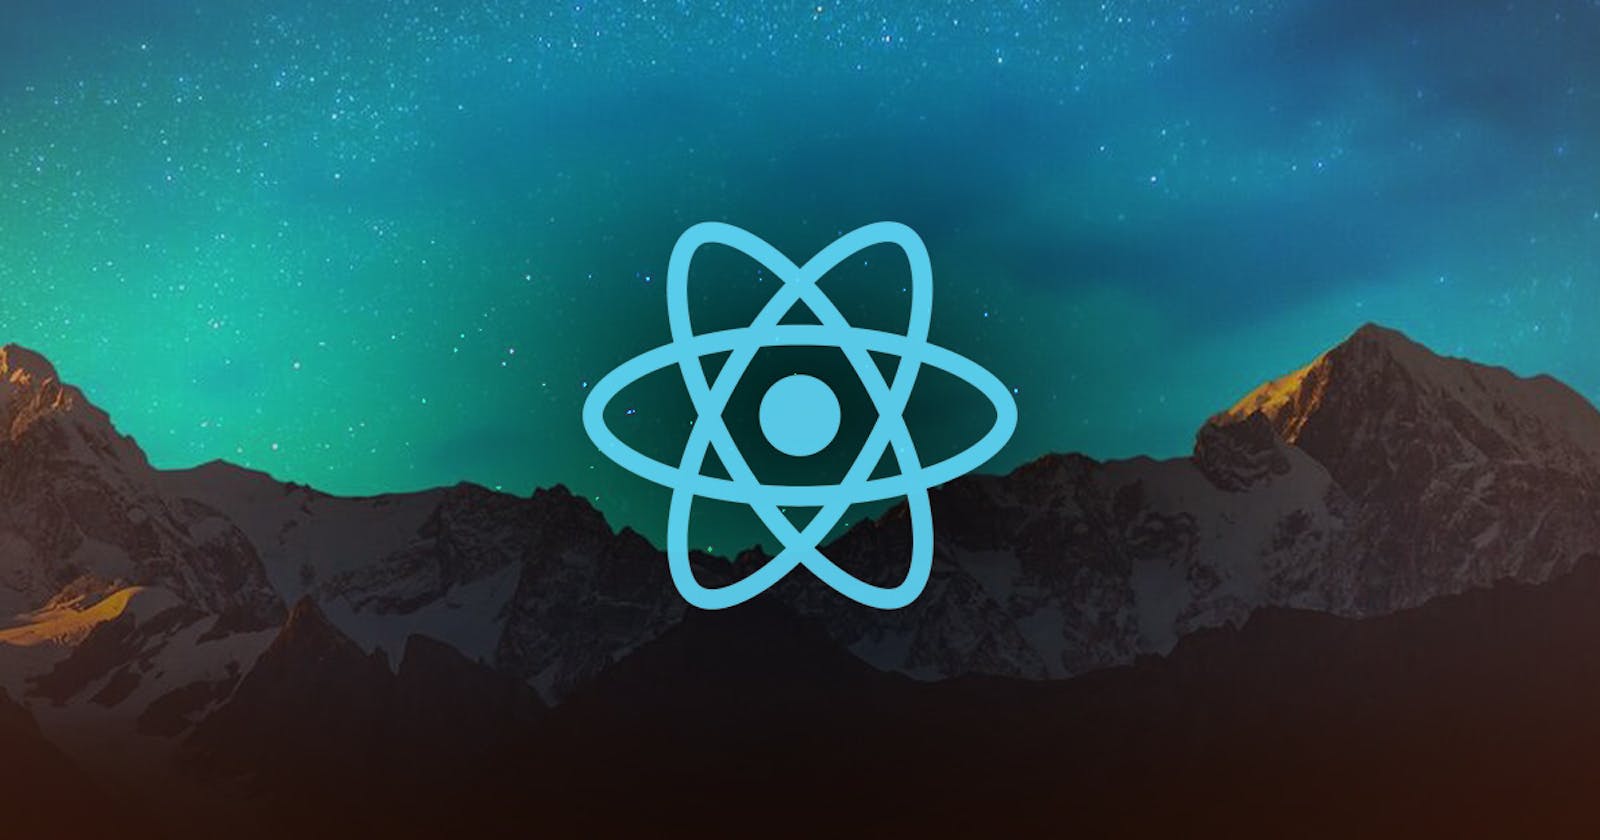 Setting up a react application with routing, context management and error handling